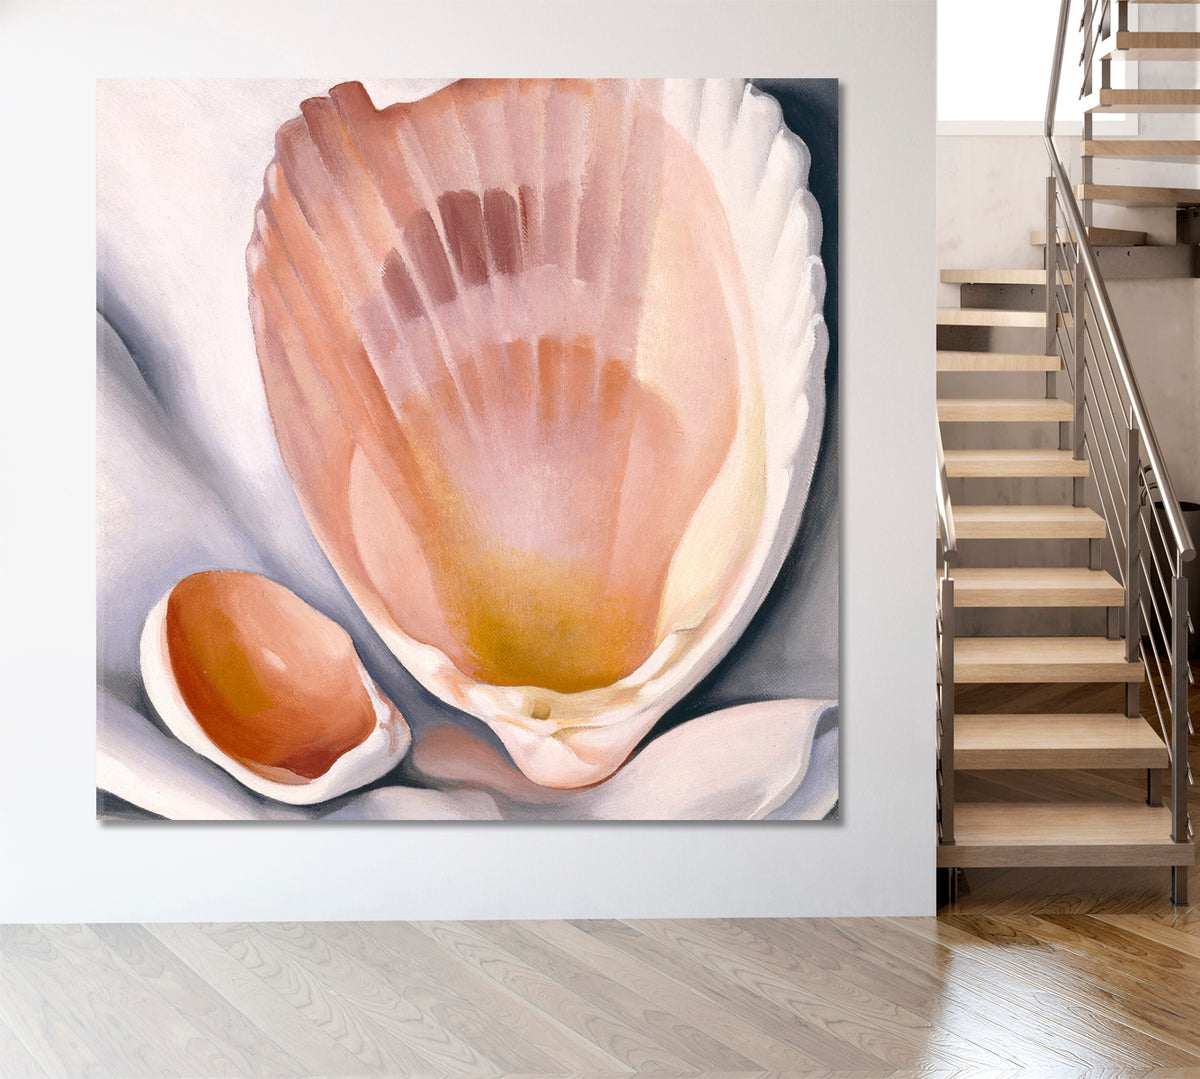 Two Pink Shells Woman's Art Abstract Forms - Square Abstract Art Print Artesty 1 Panel 12"x12" 